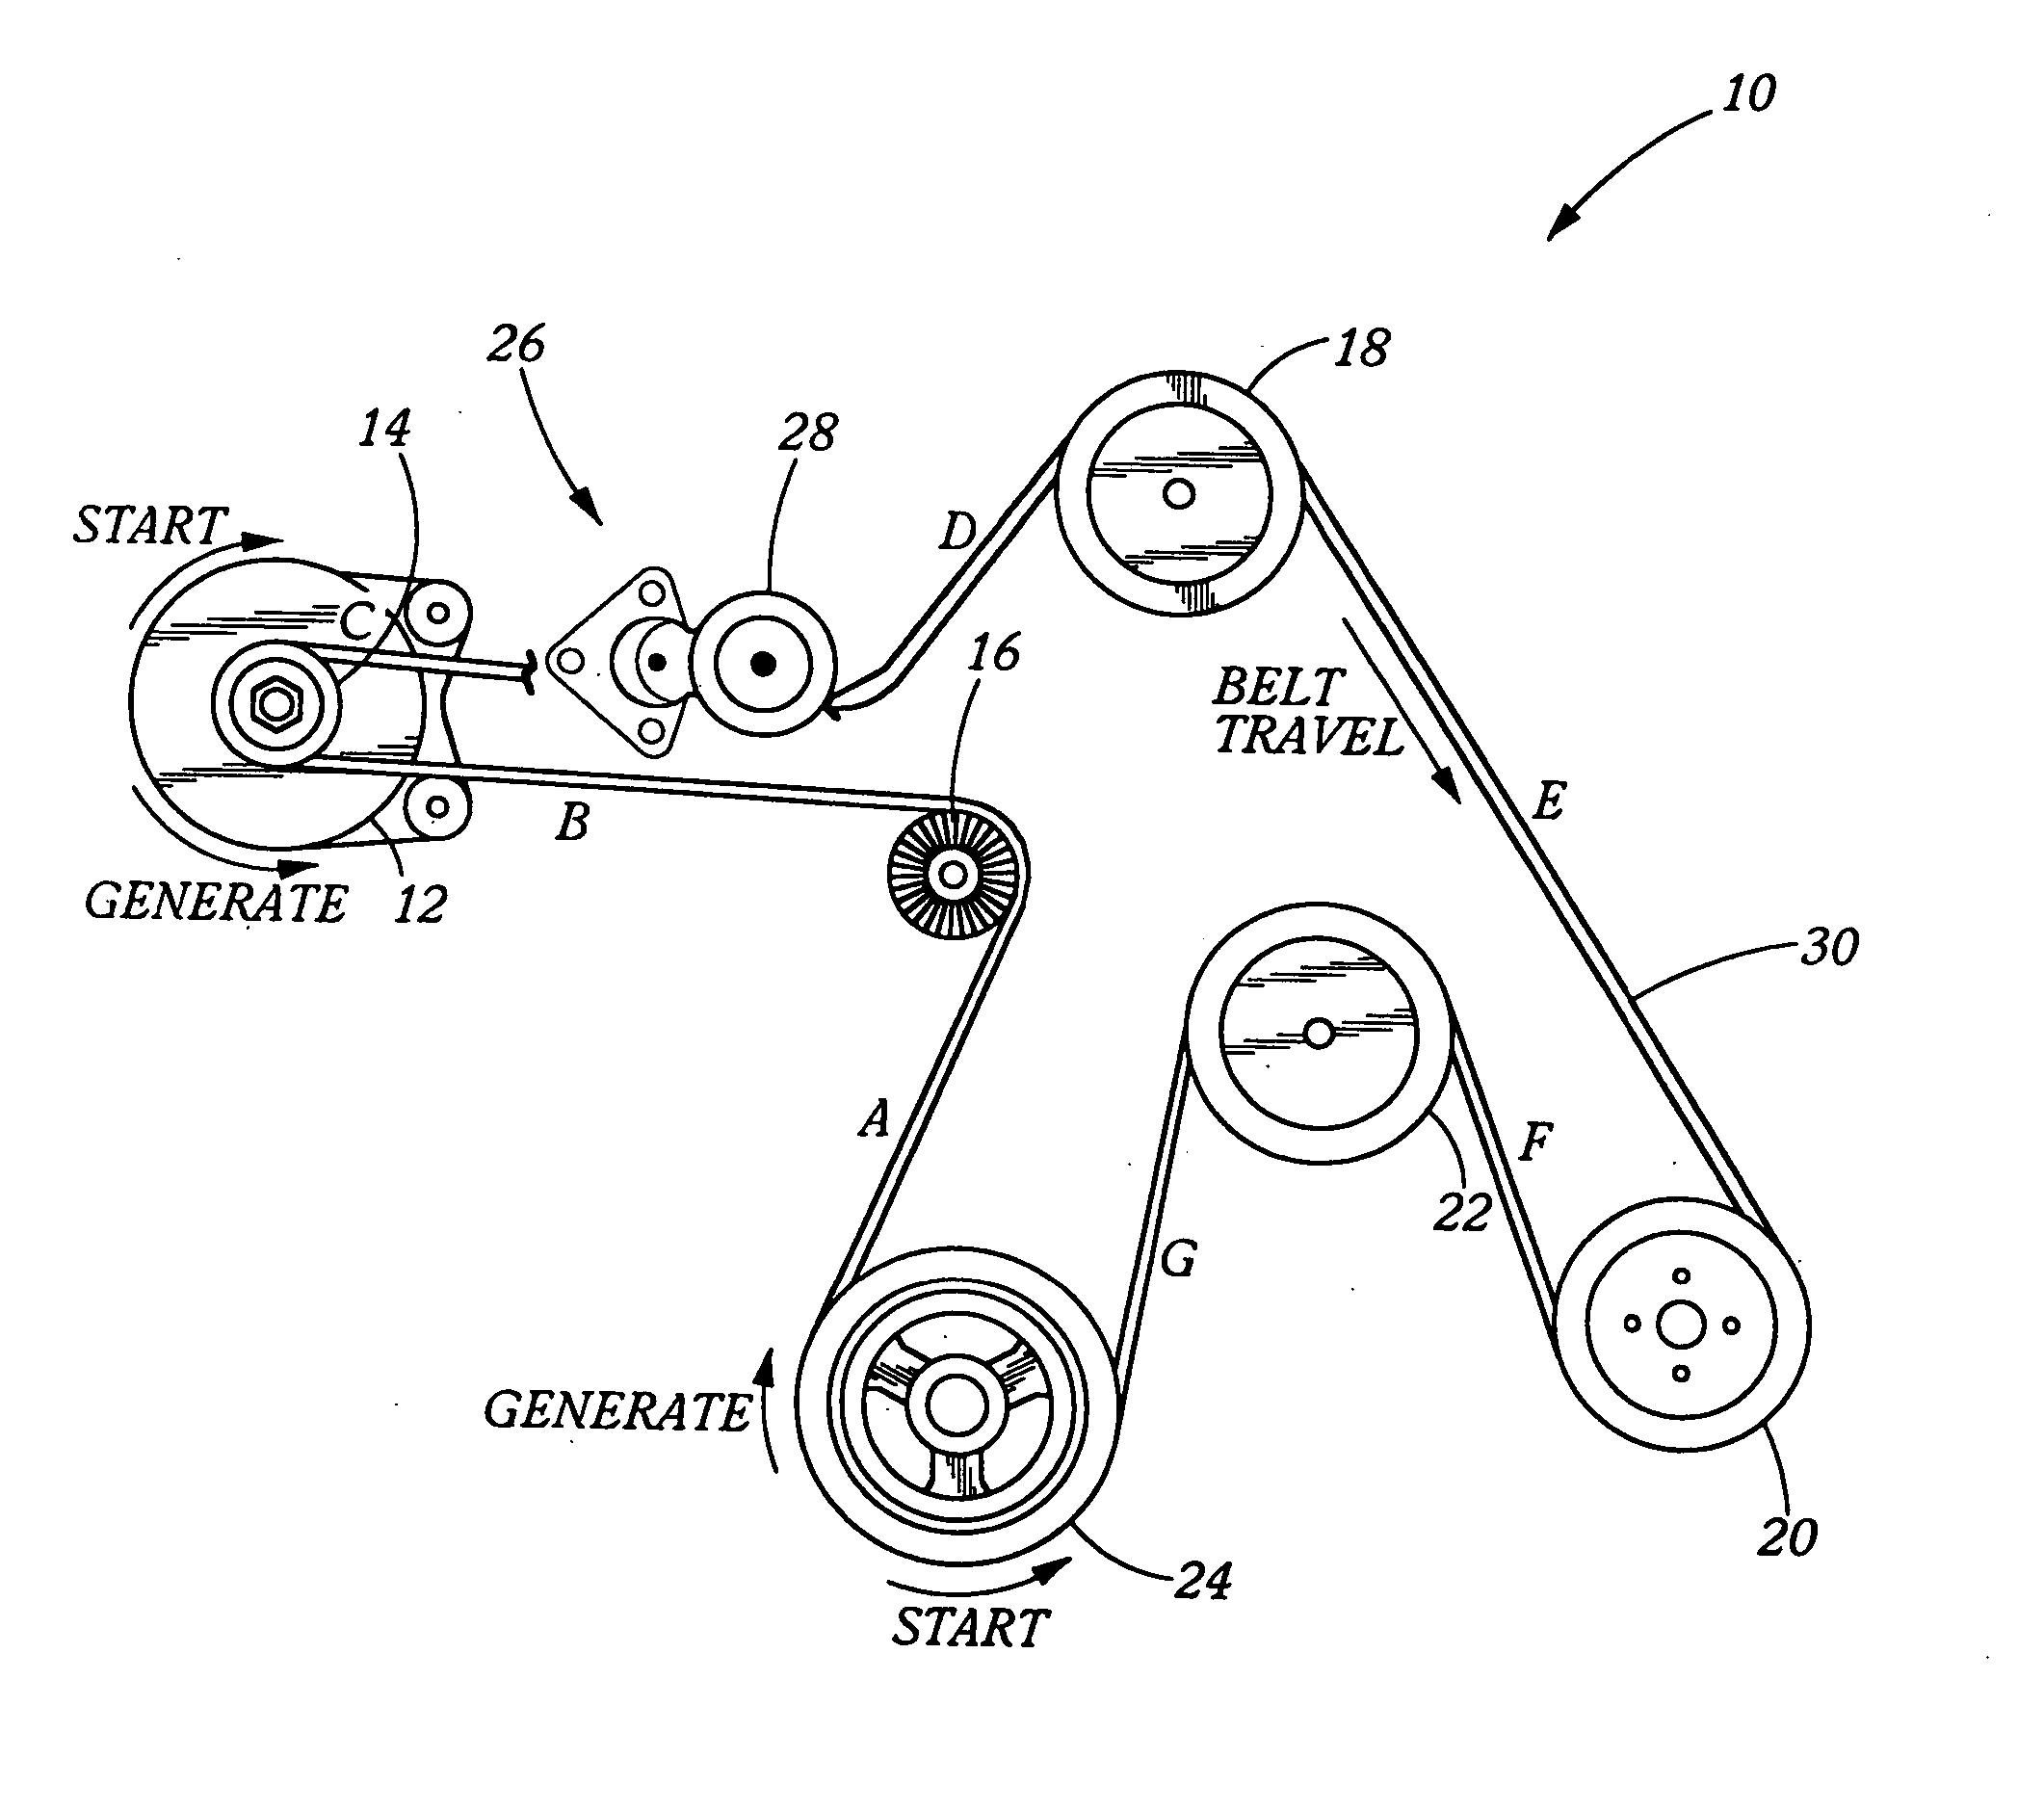 Damped accessory drive system including a motor/generator